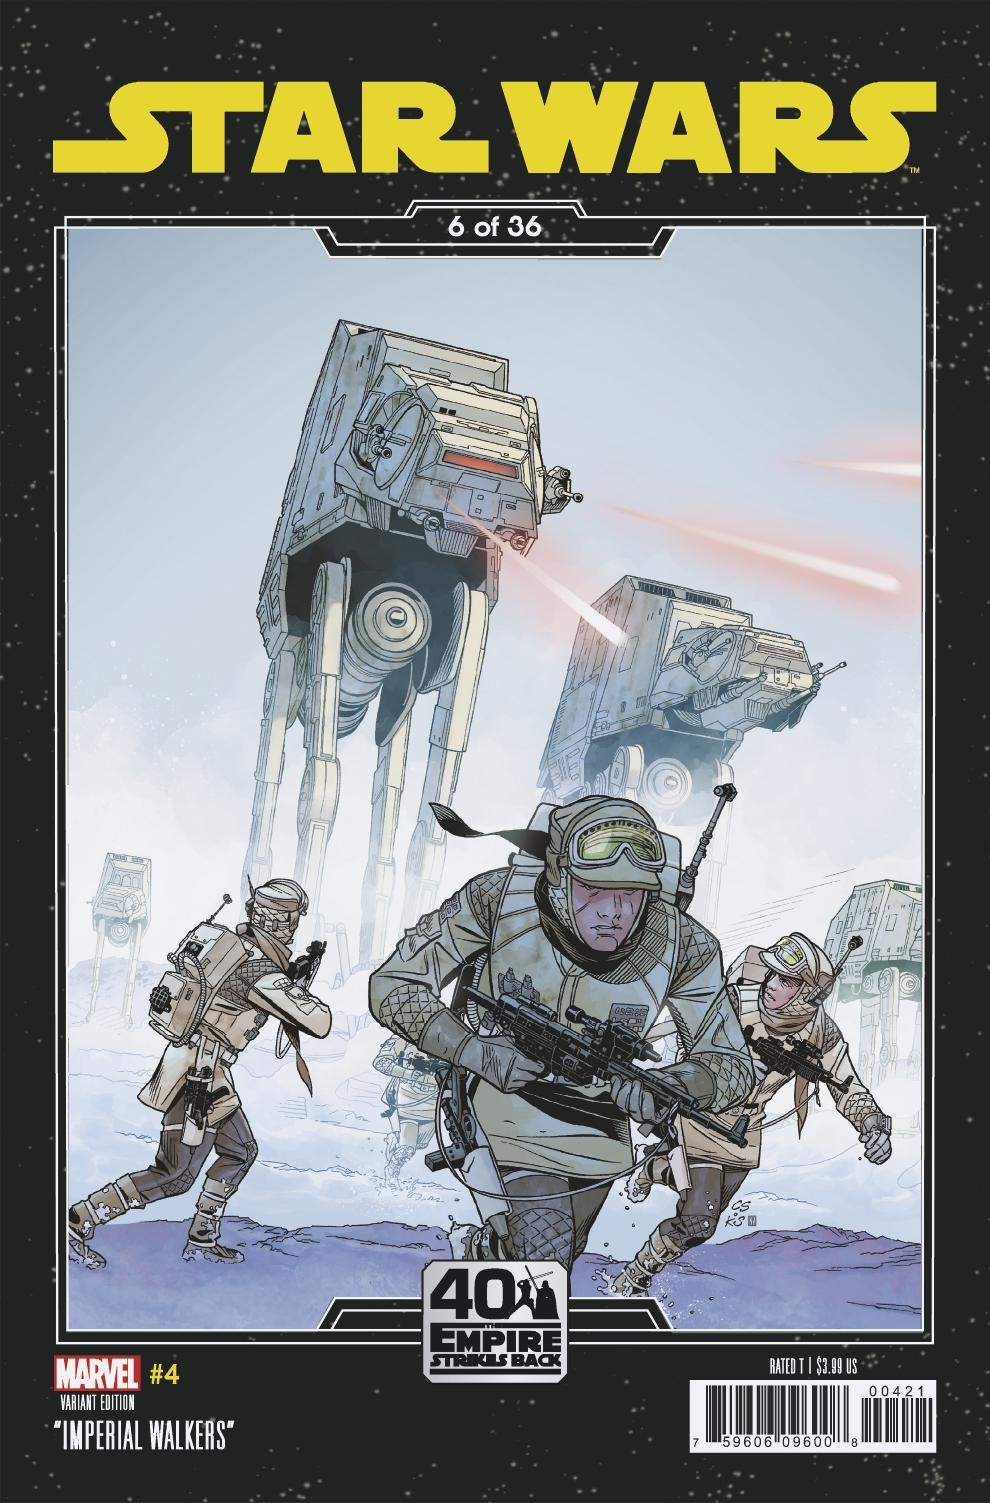 Star Wars #4 (Chris Sprouse The Empire Strikes Back Variant Cover 6 of 36) (18.03.2020)